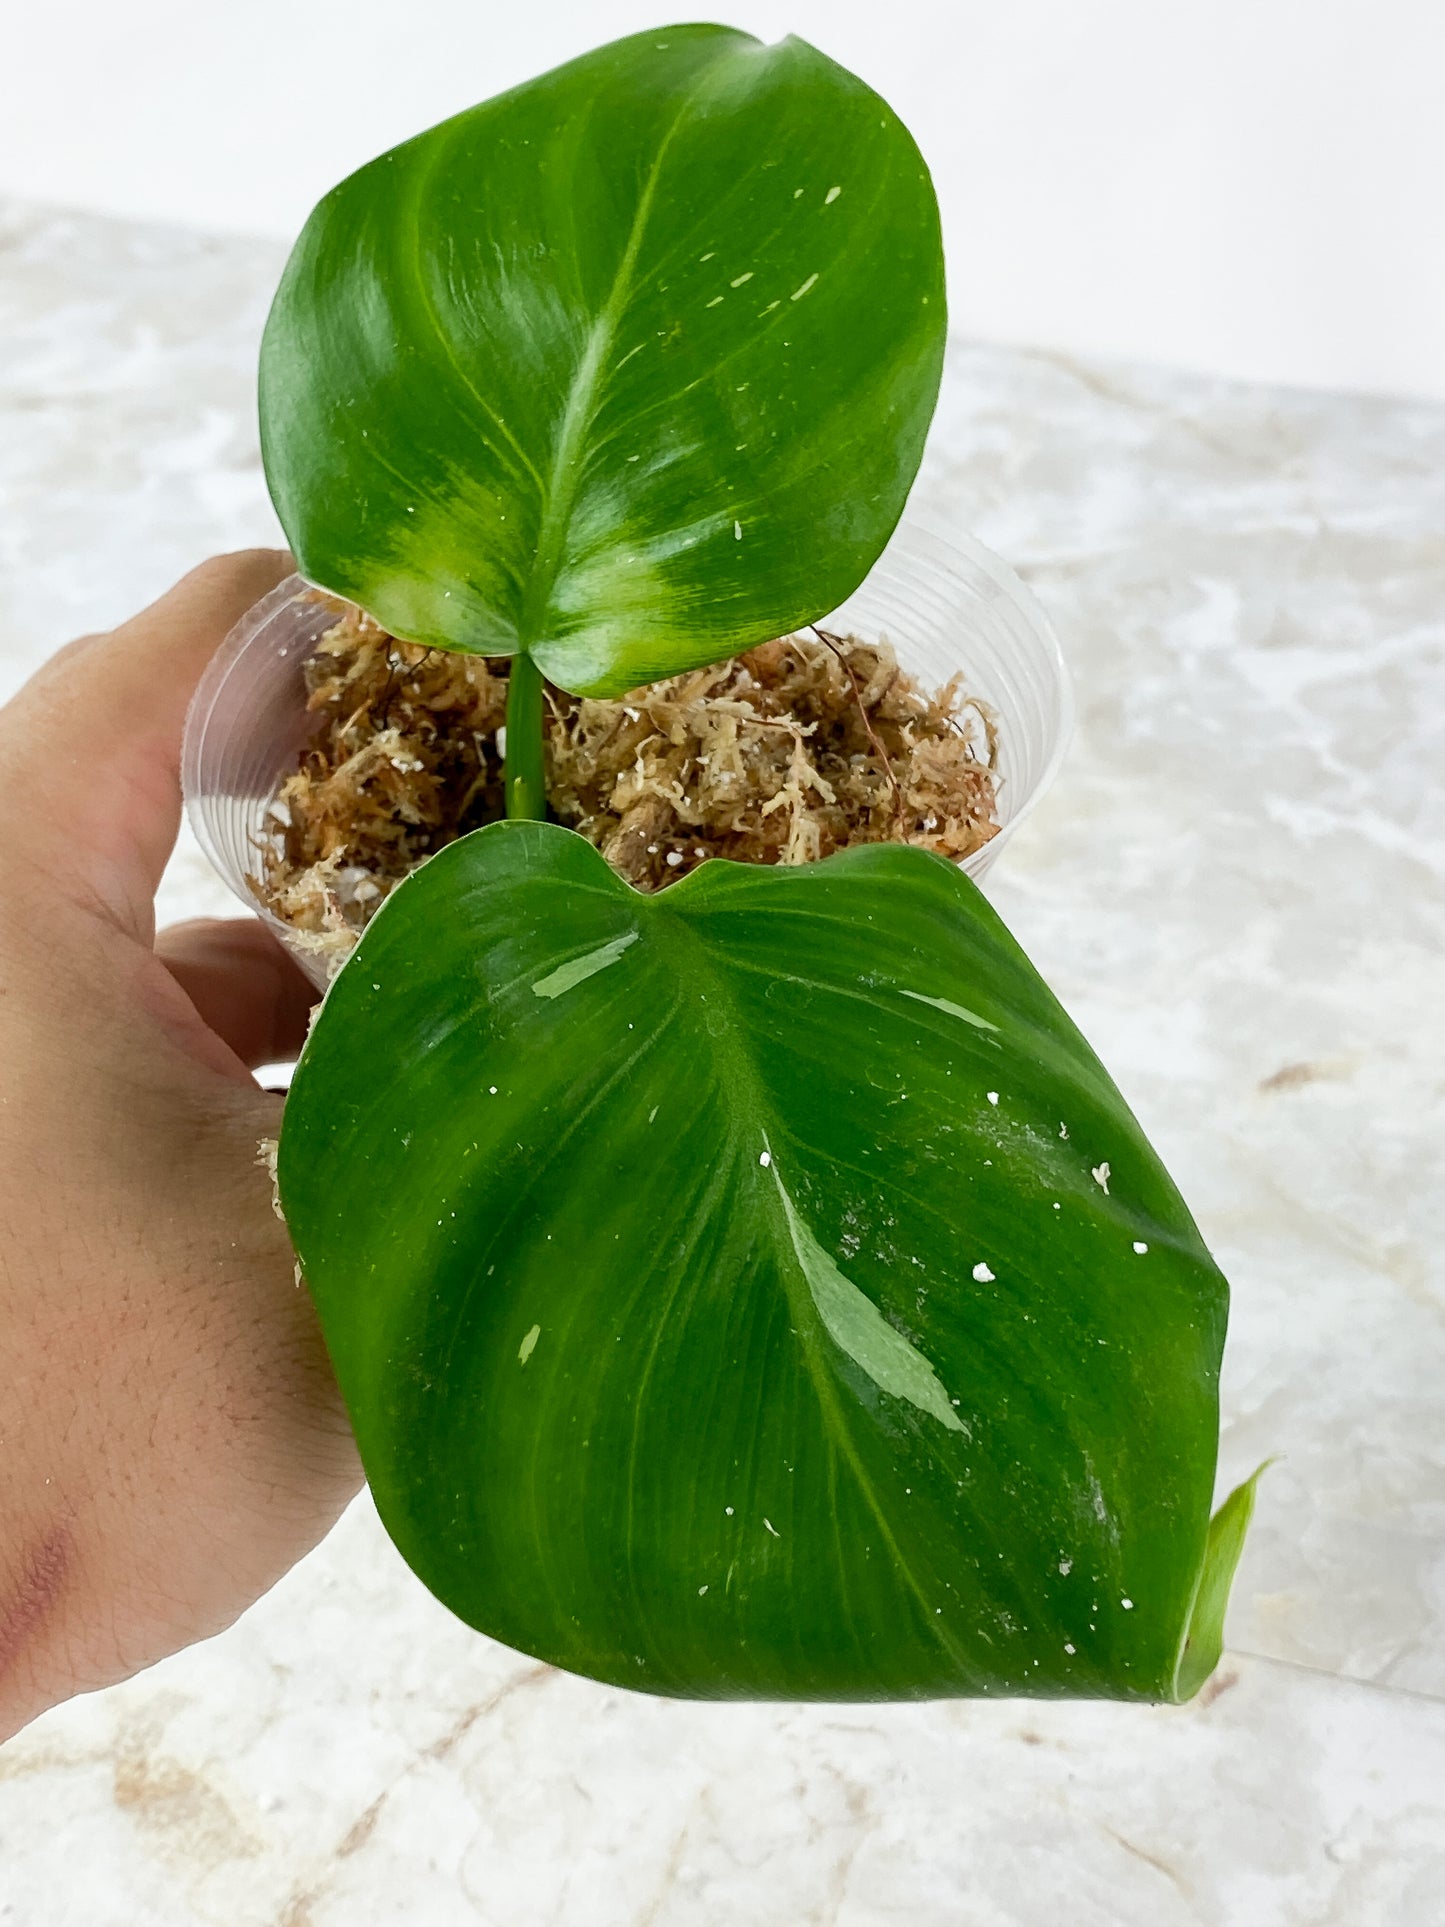 Philodendron White Wizard Rooting 2 leaves. Top cutting